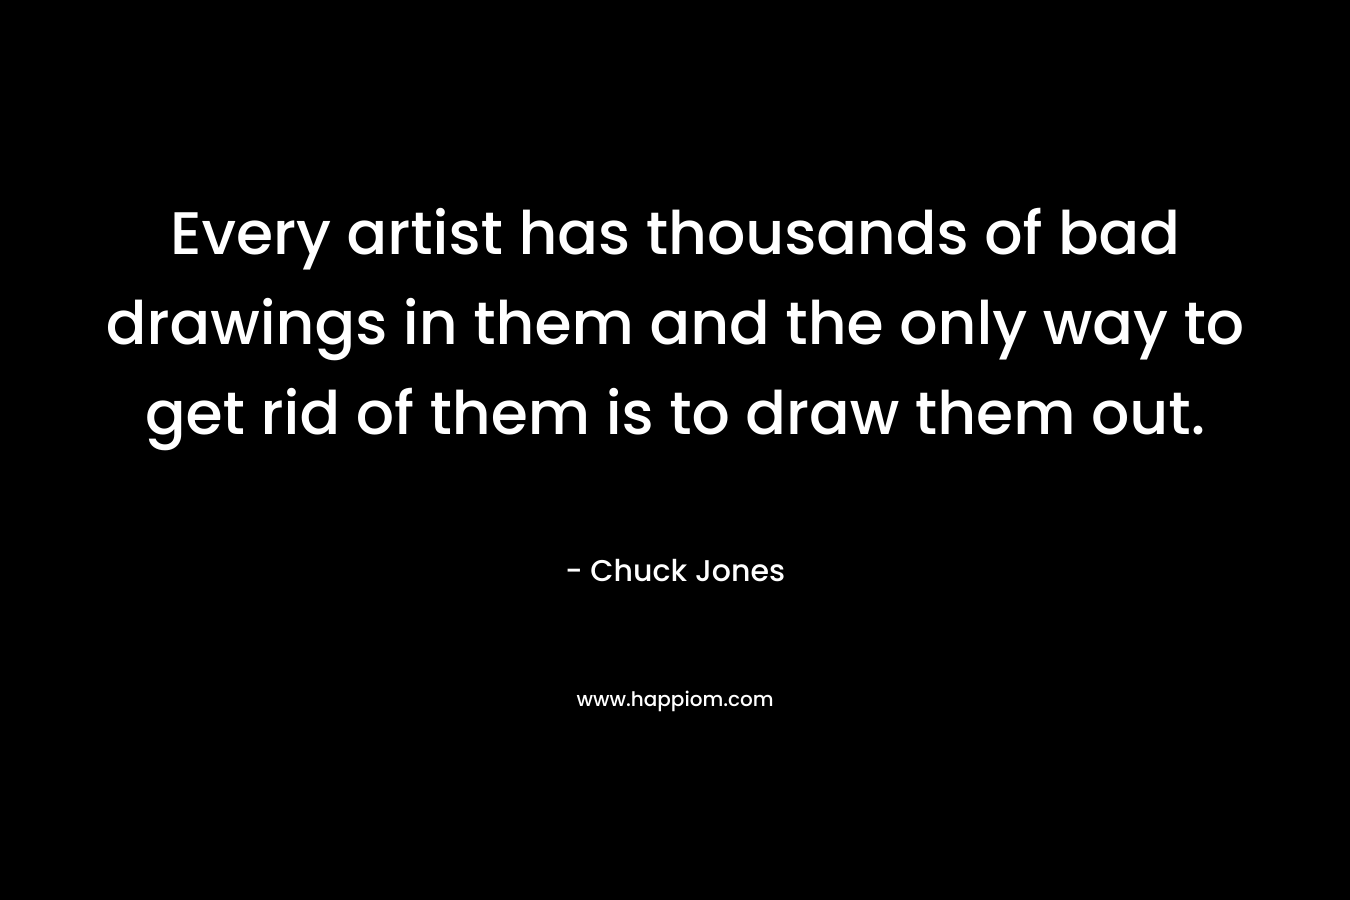 Every artist has thousands of bad drawings in them and the only way to get rid of them is to draw them out. – Chuck Jones